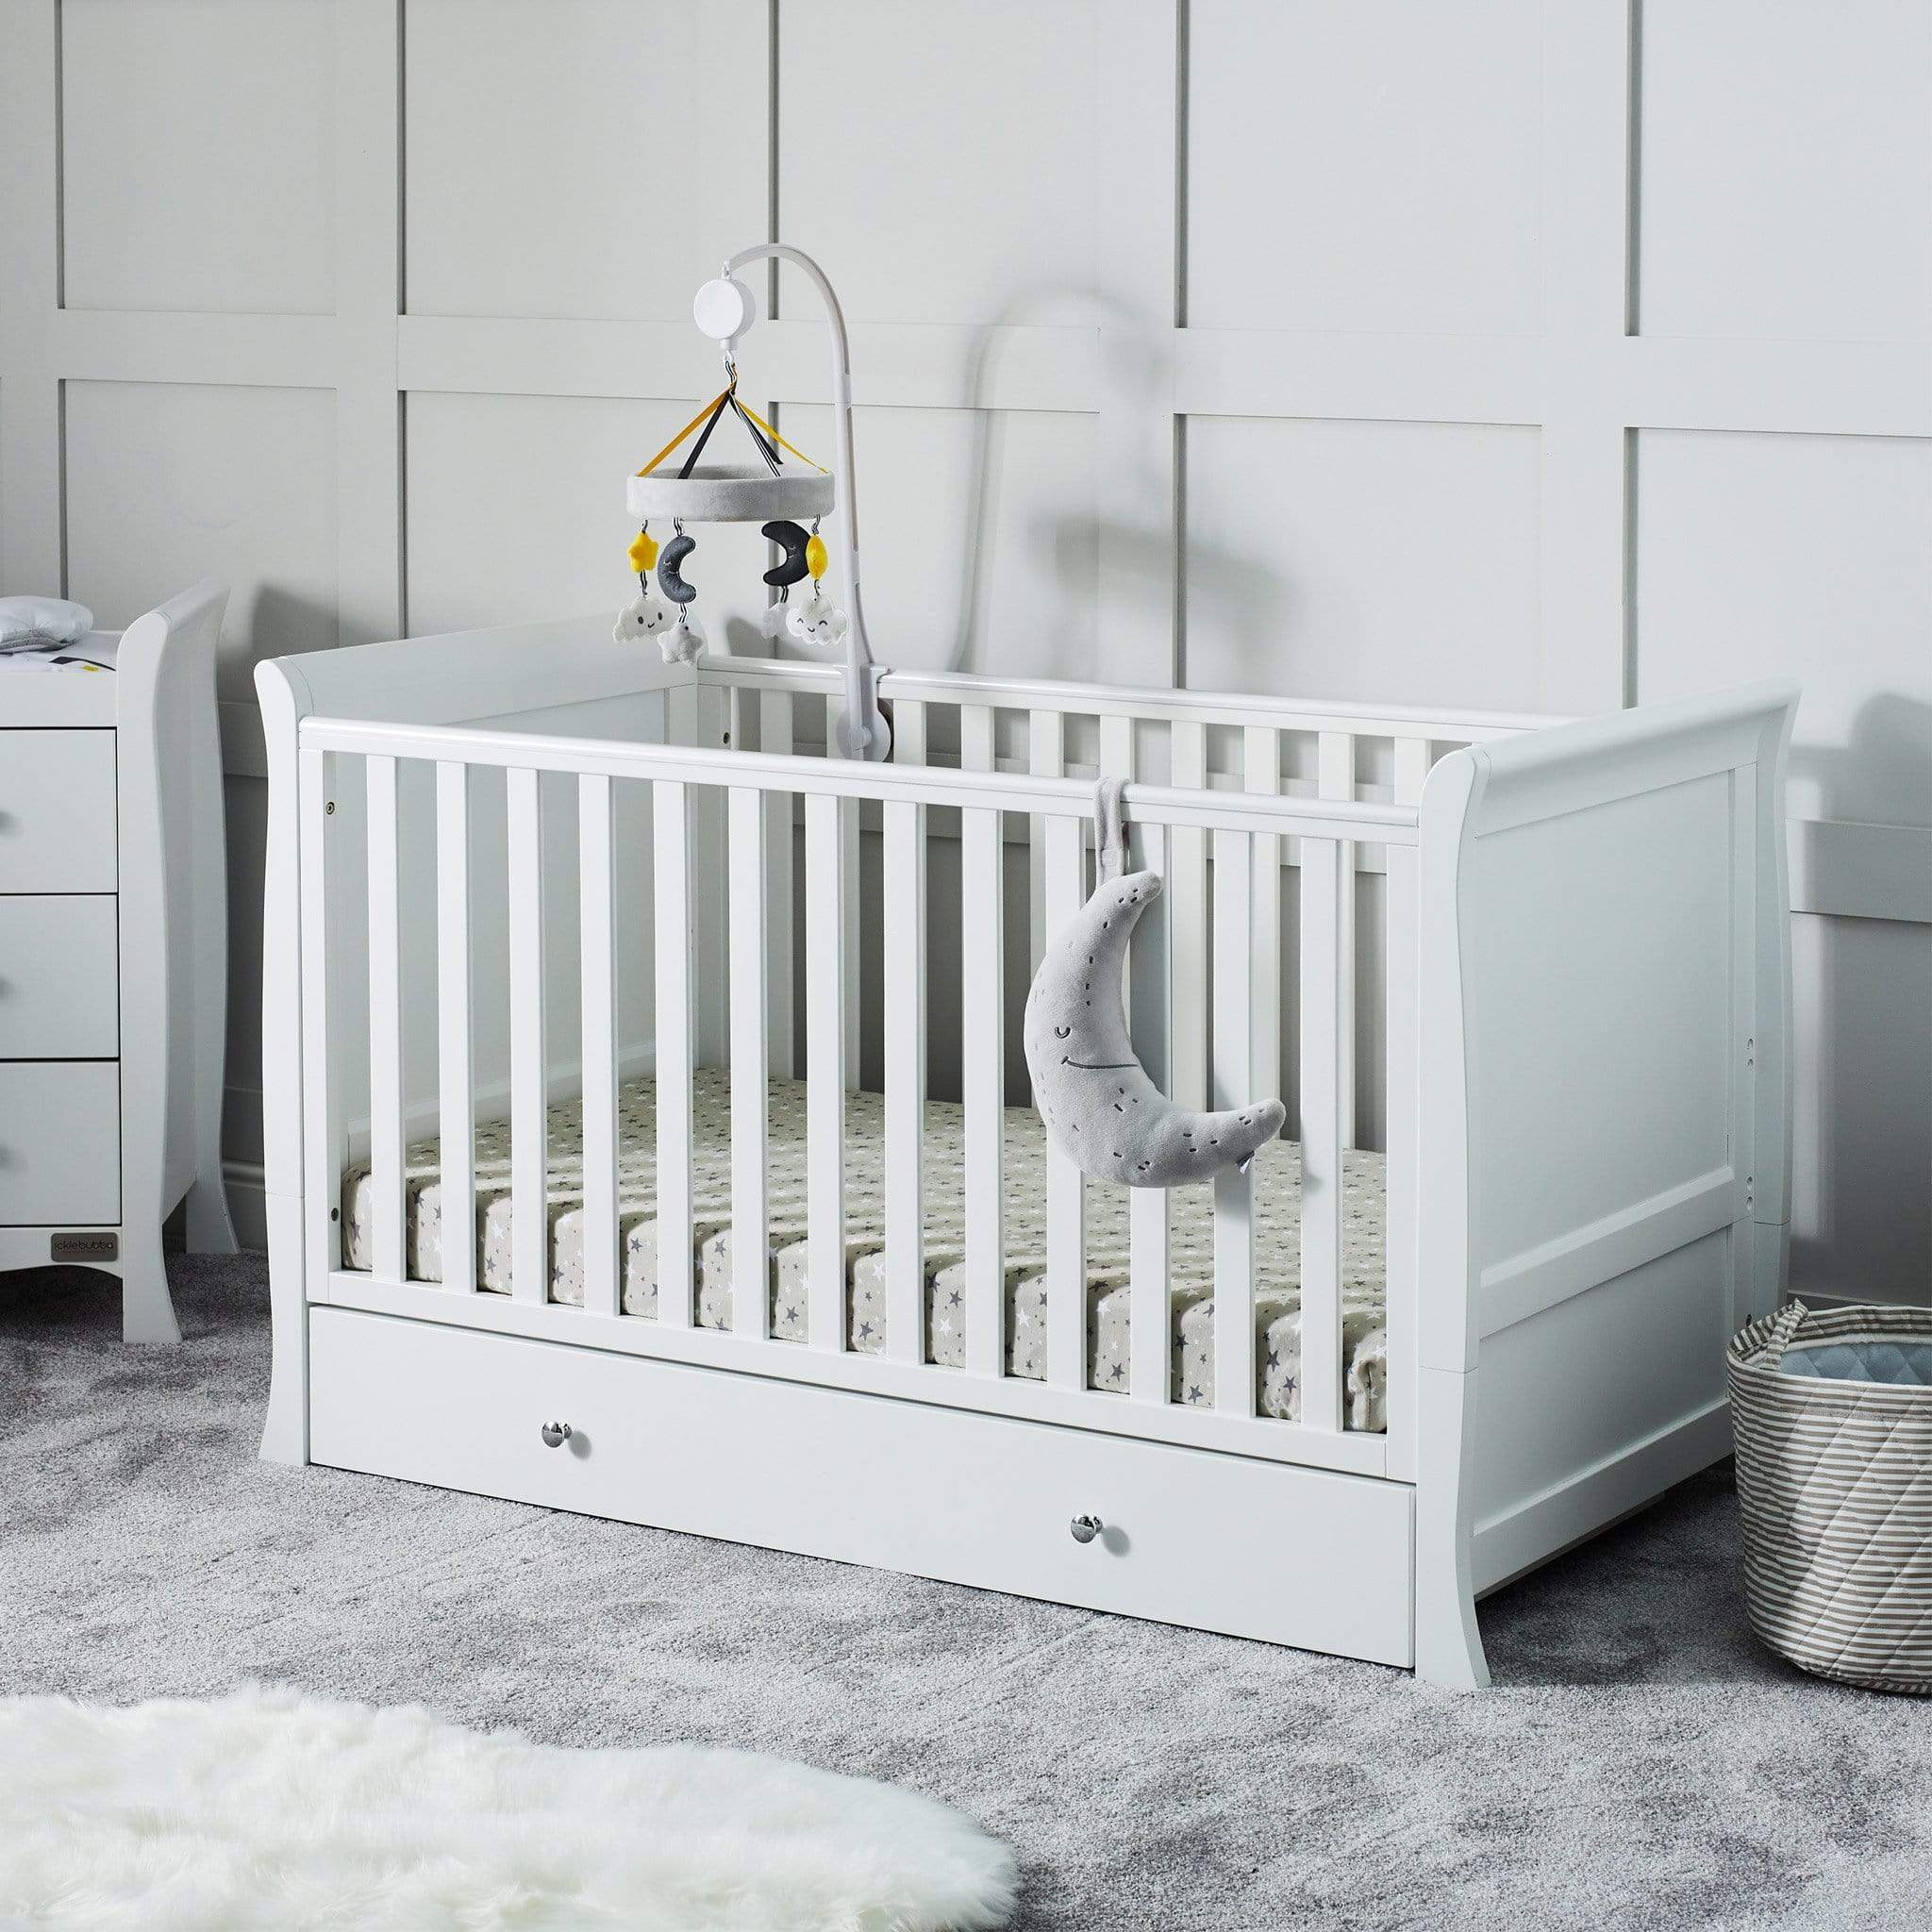 Ickle Bubba Cot Beds Ickle Bubba Snowdon Classic Cot Bed - White